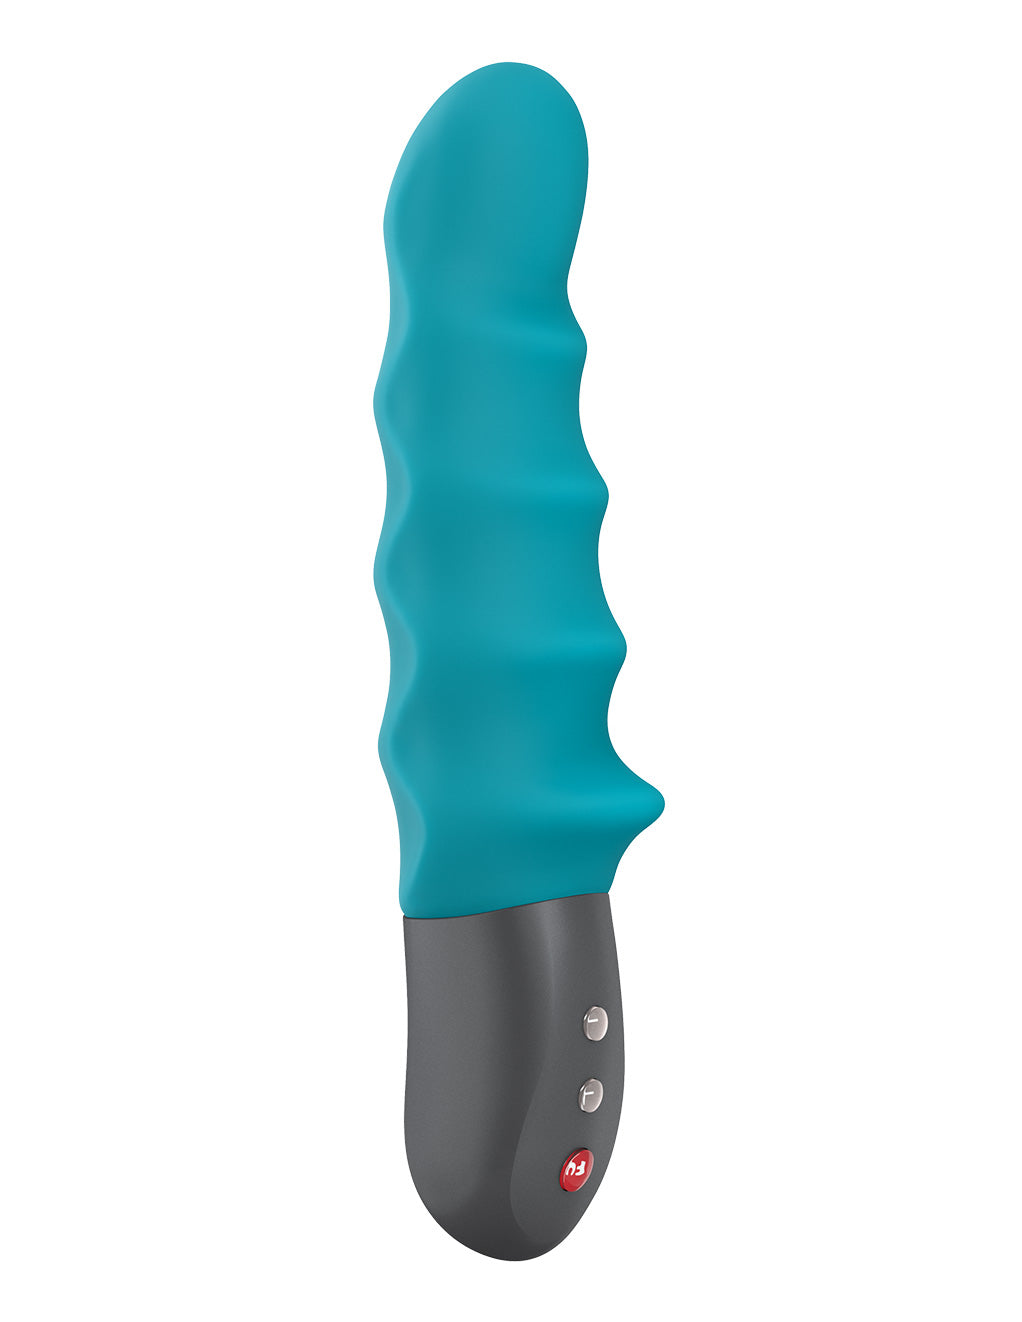 Stronic Surf Vibrator by Fun Factory blue side